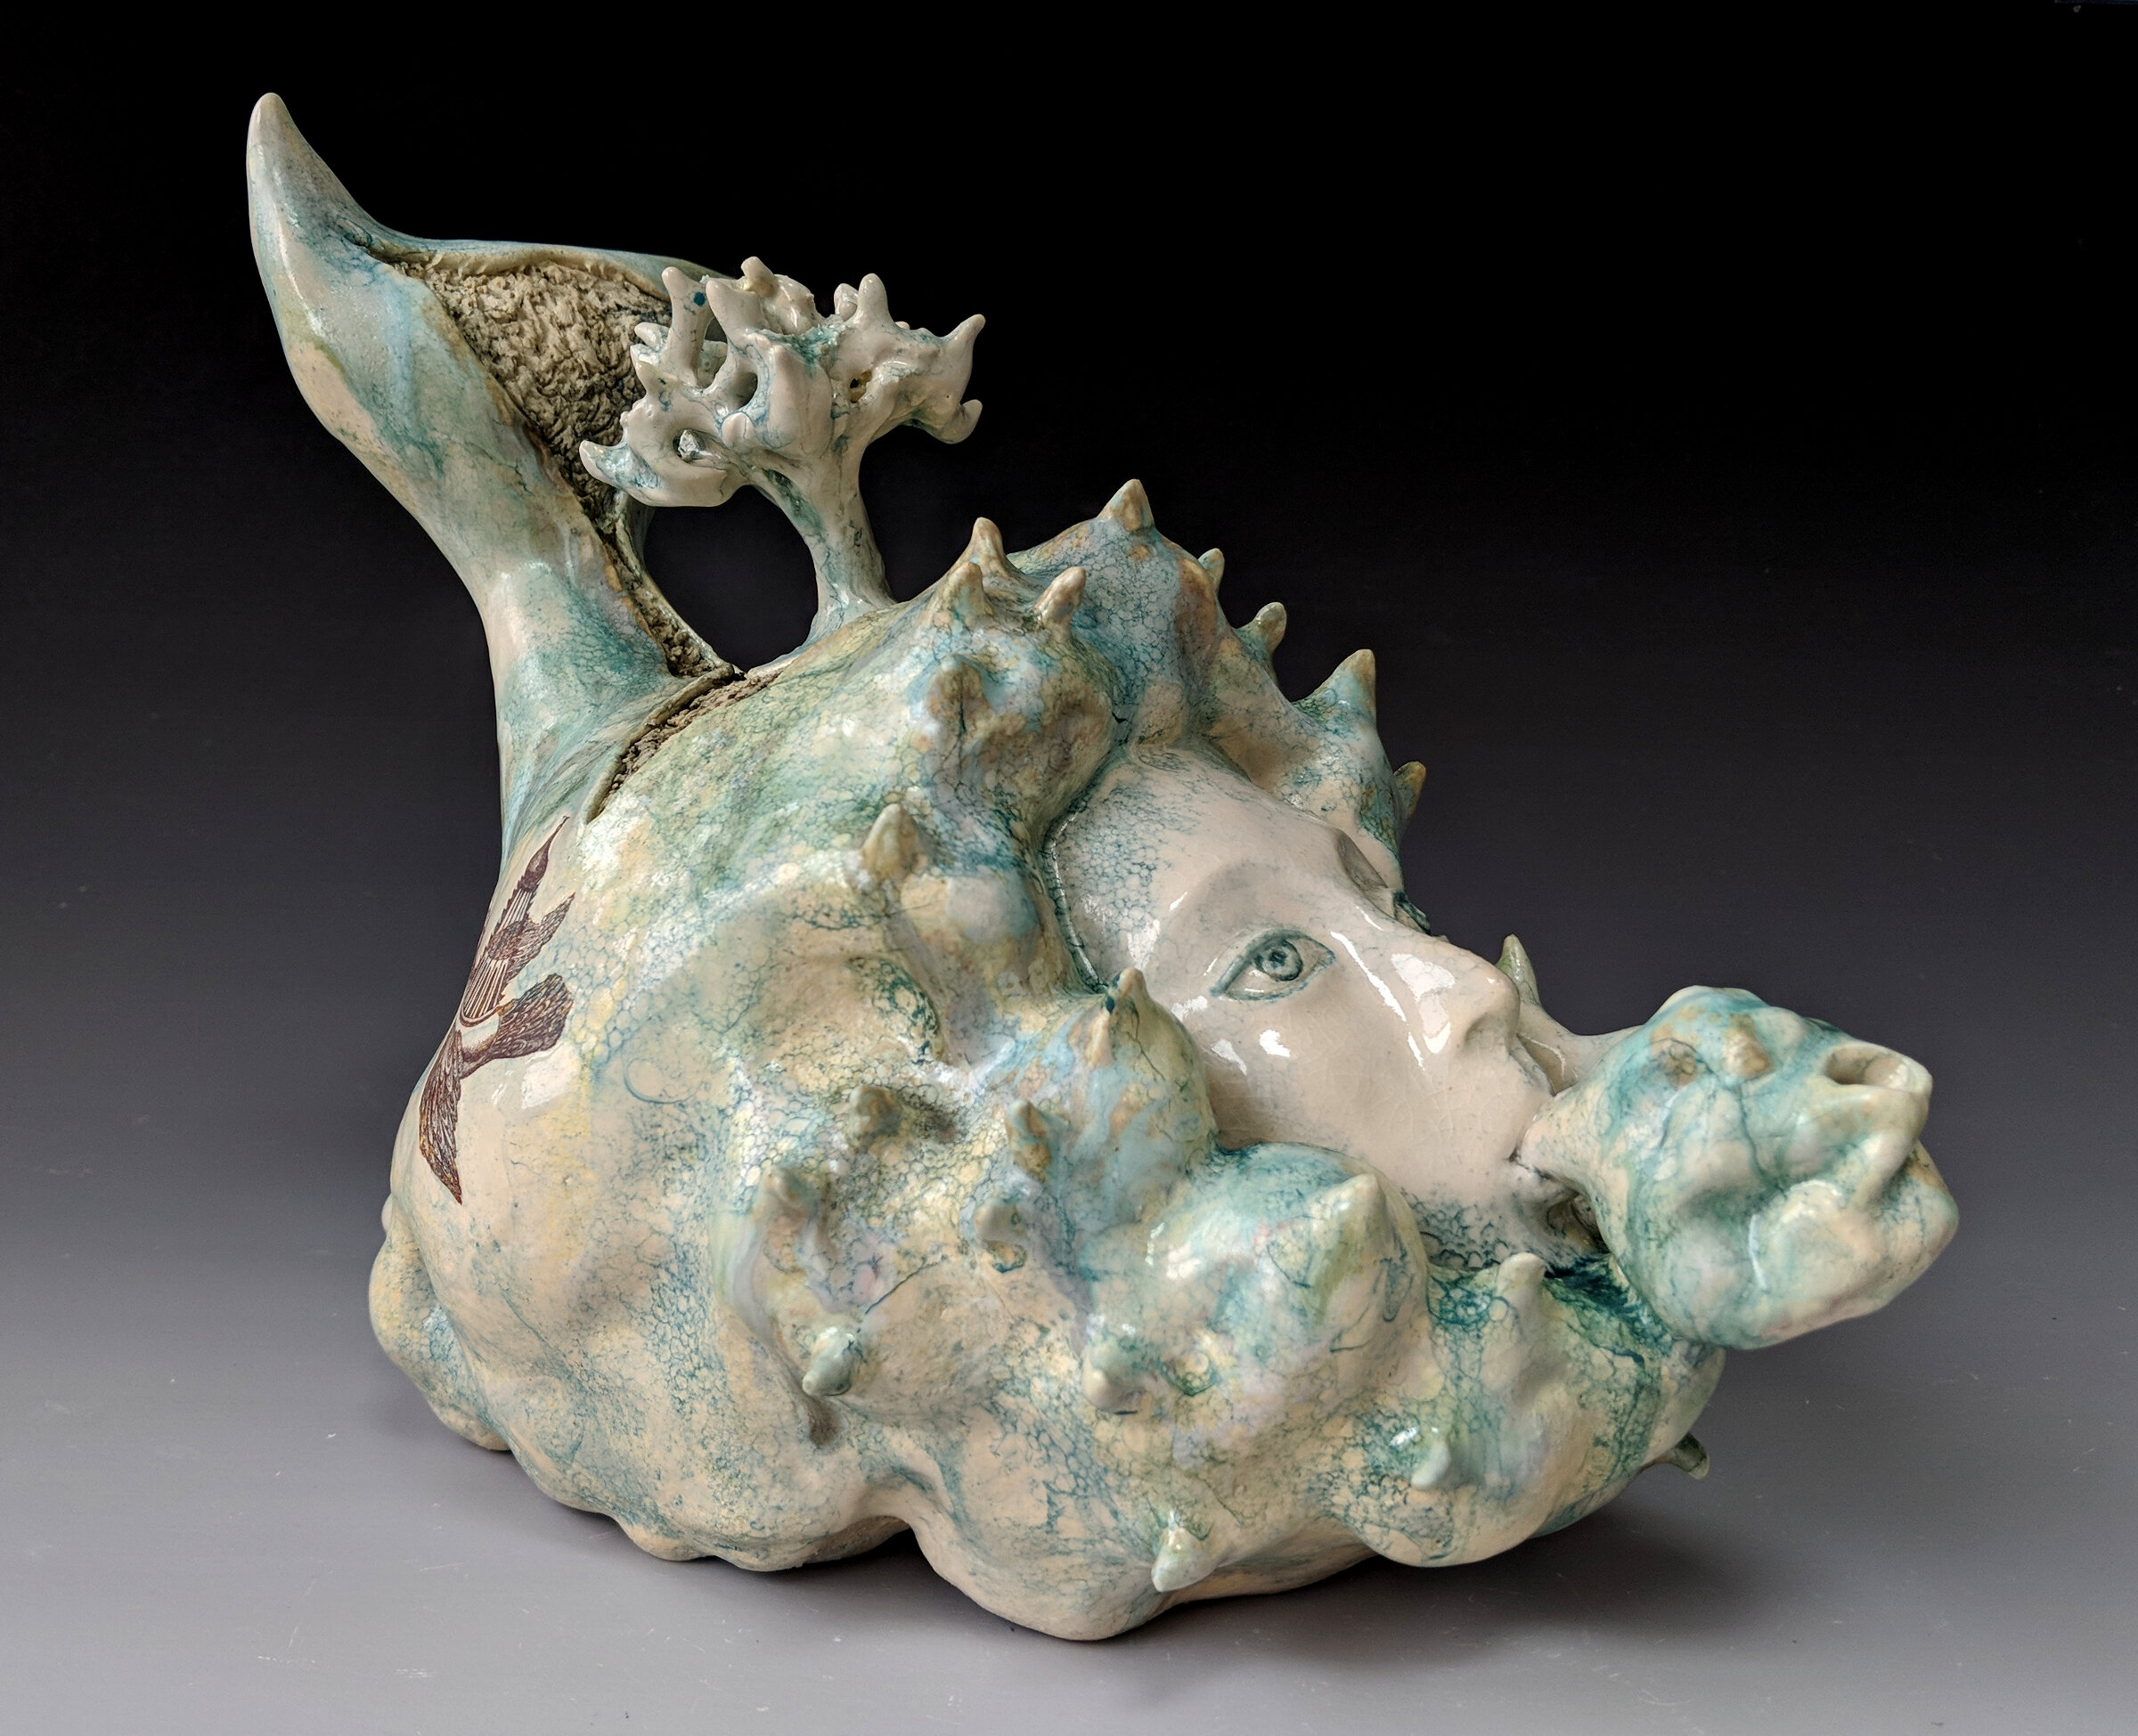    Cloud Maker     stoneware, stains, glazes, 8 x 10 x 7 inches 